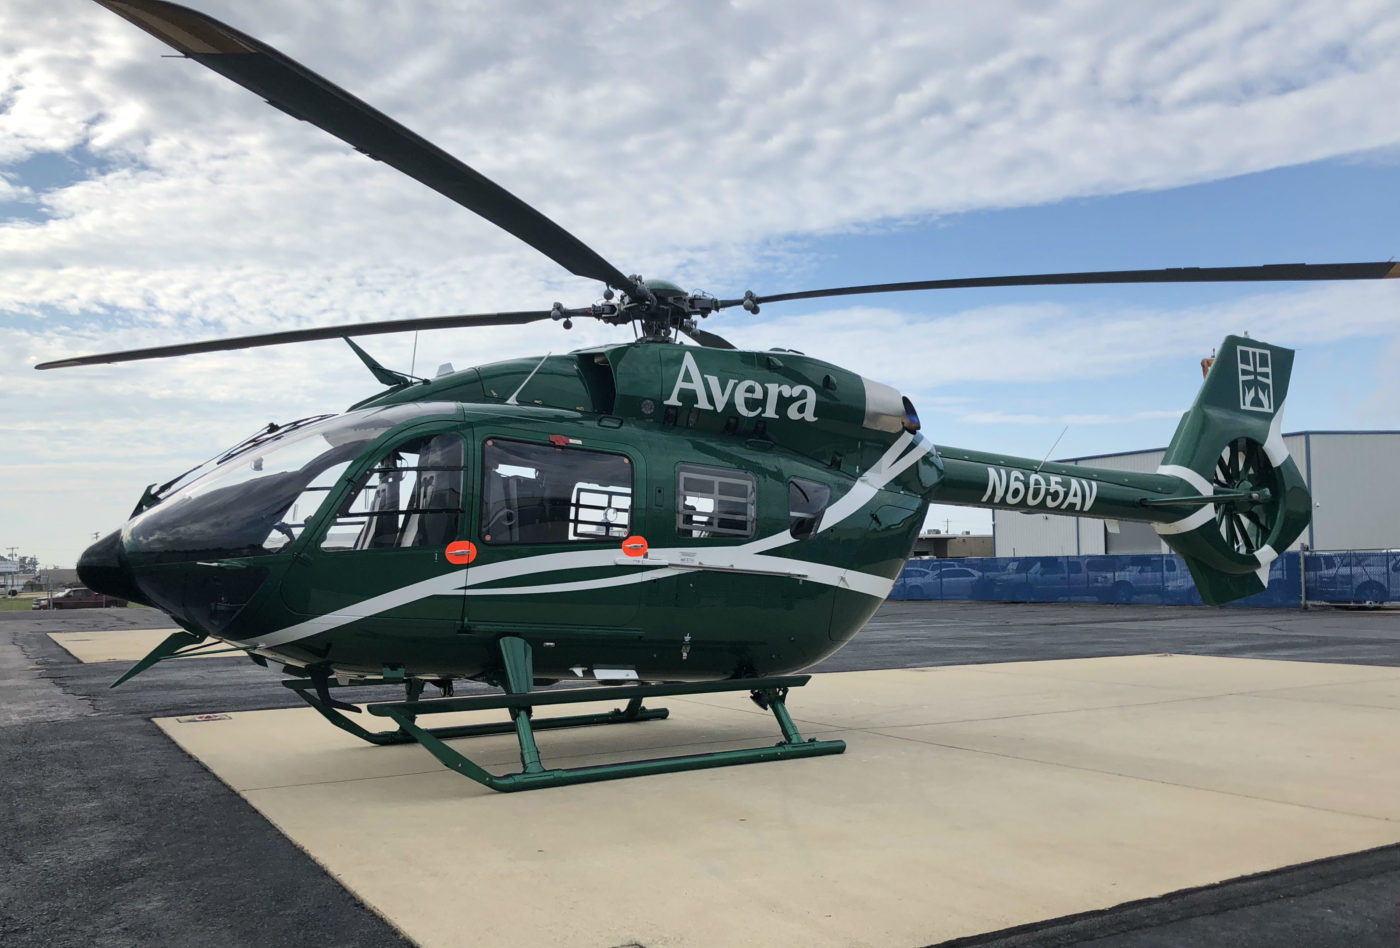 This delivery has provided Avera Careflight with its first ever H145 helicopter. Metro Aviation Photo